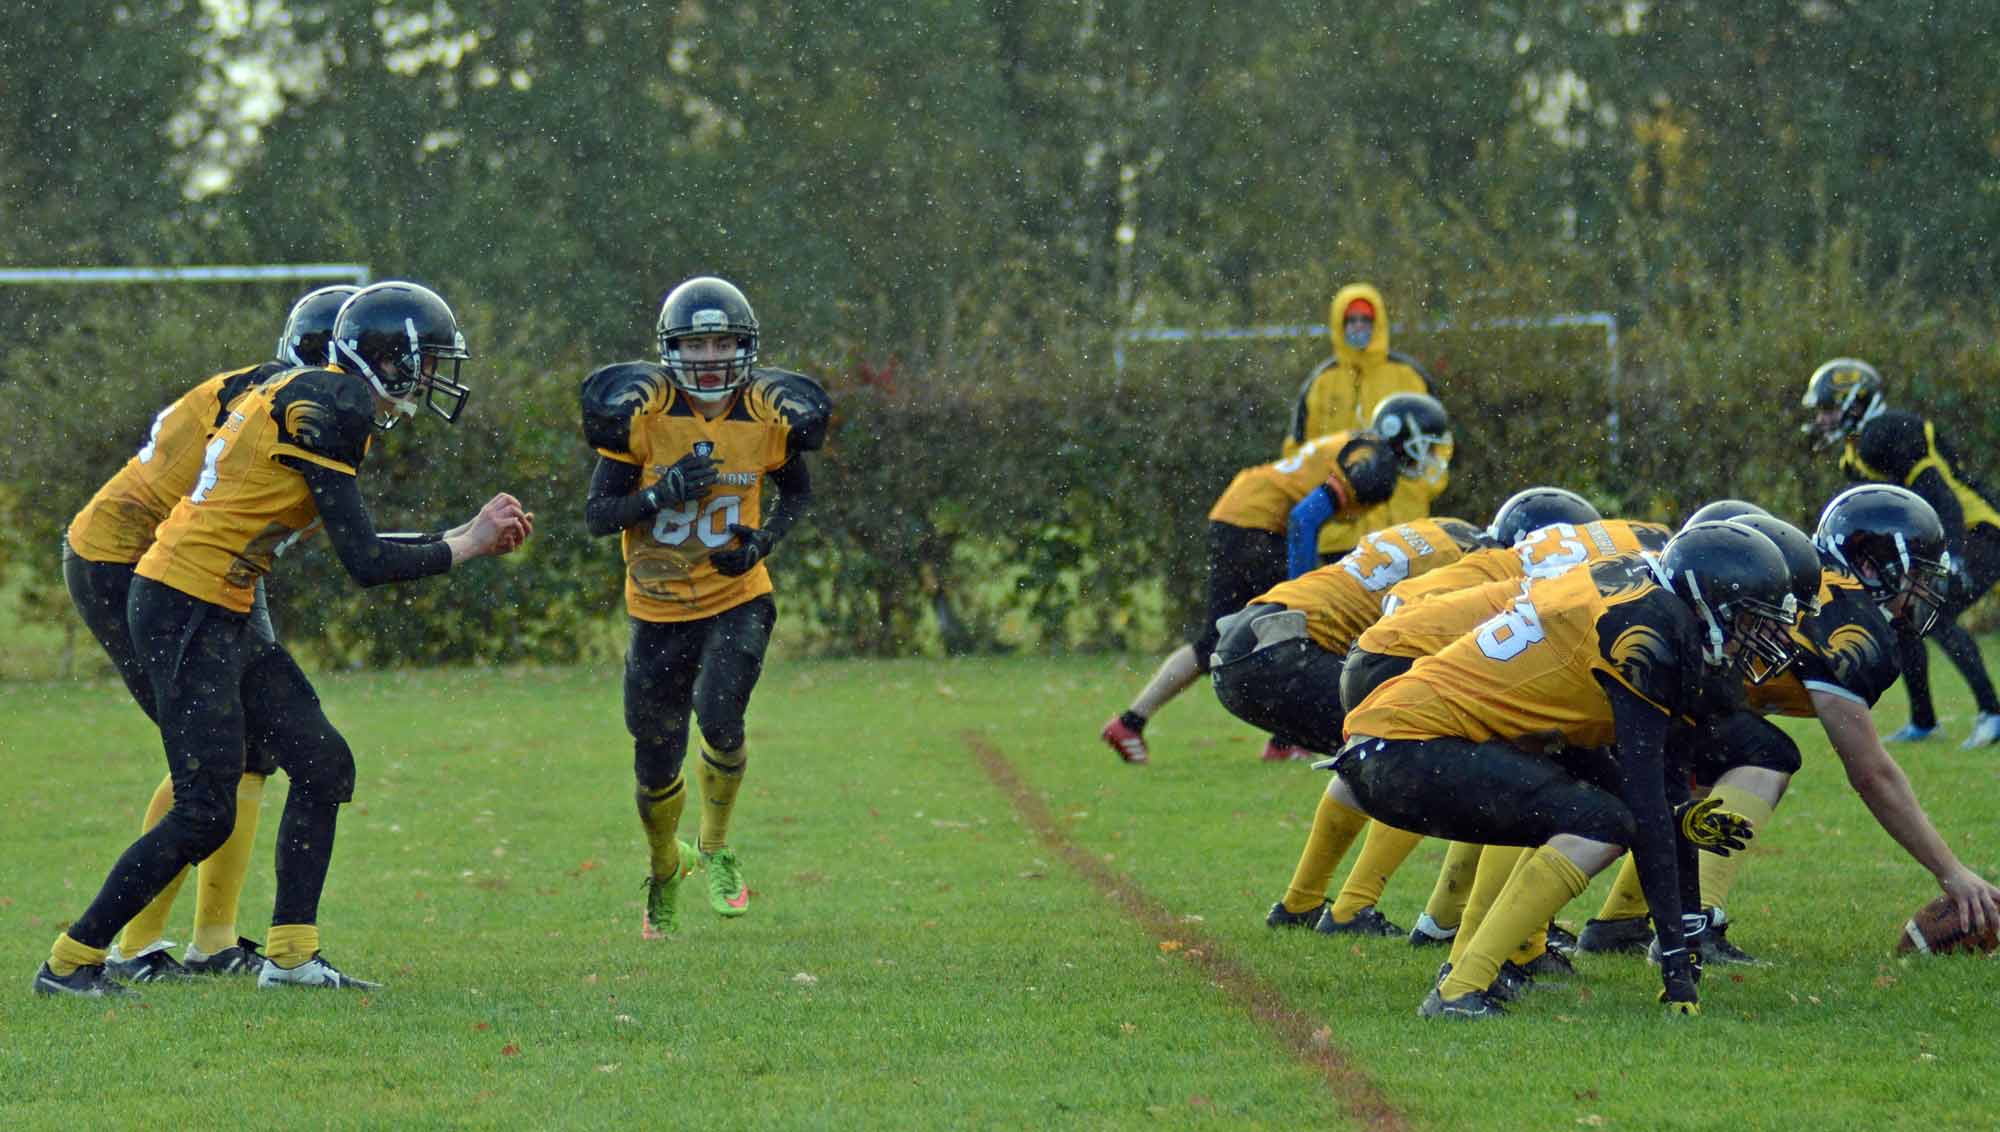 Smithers Viscient to sponsor the York Centurions American Football Team